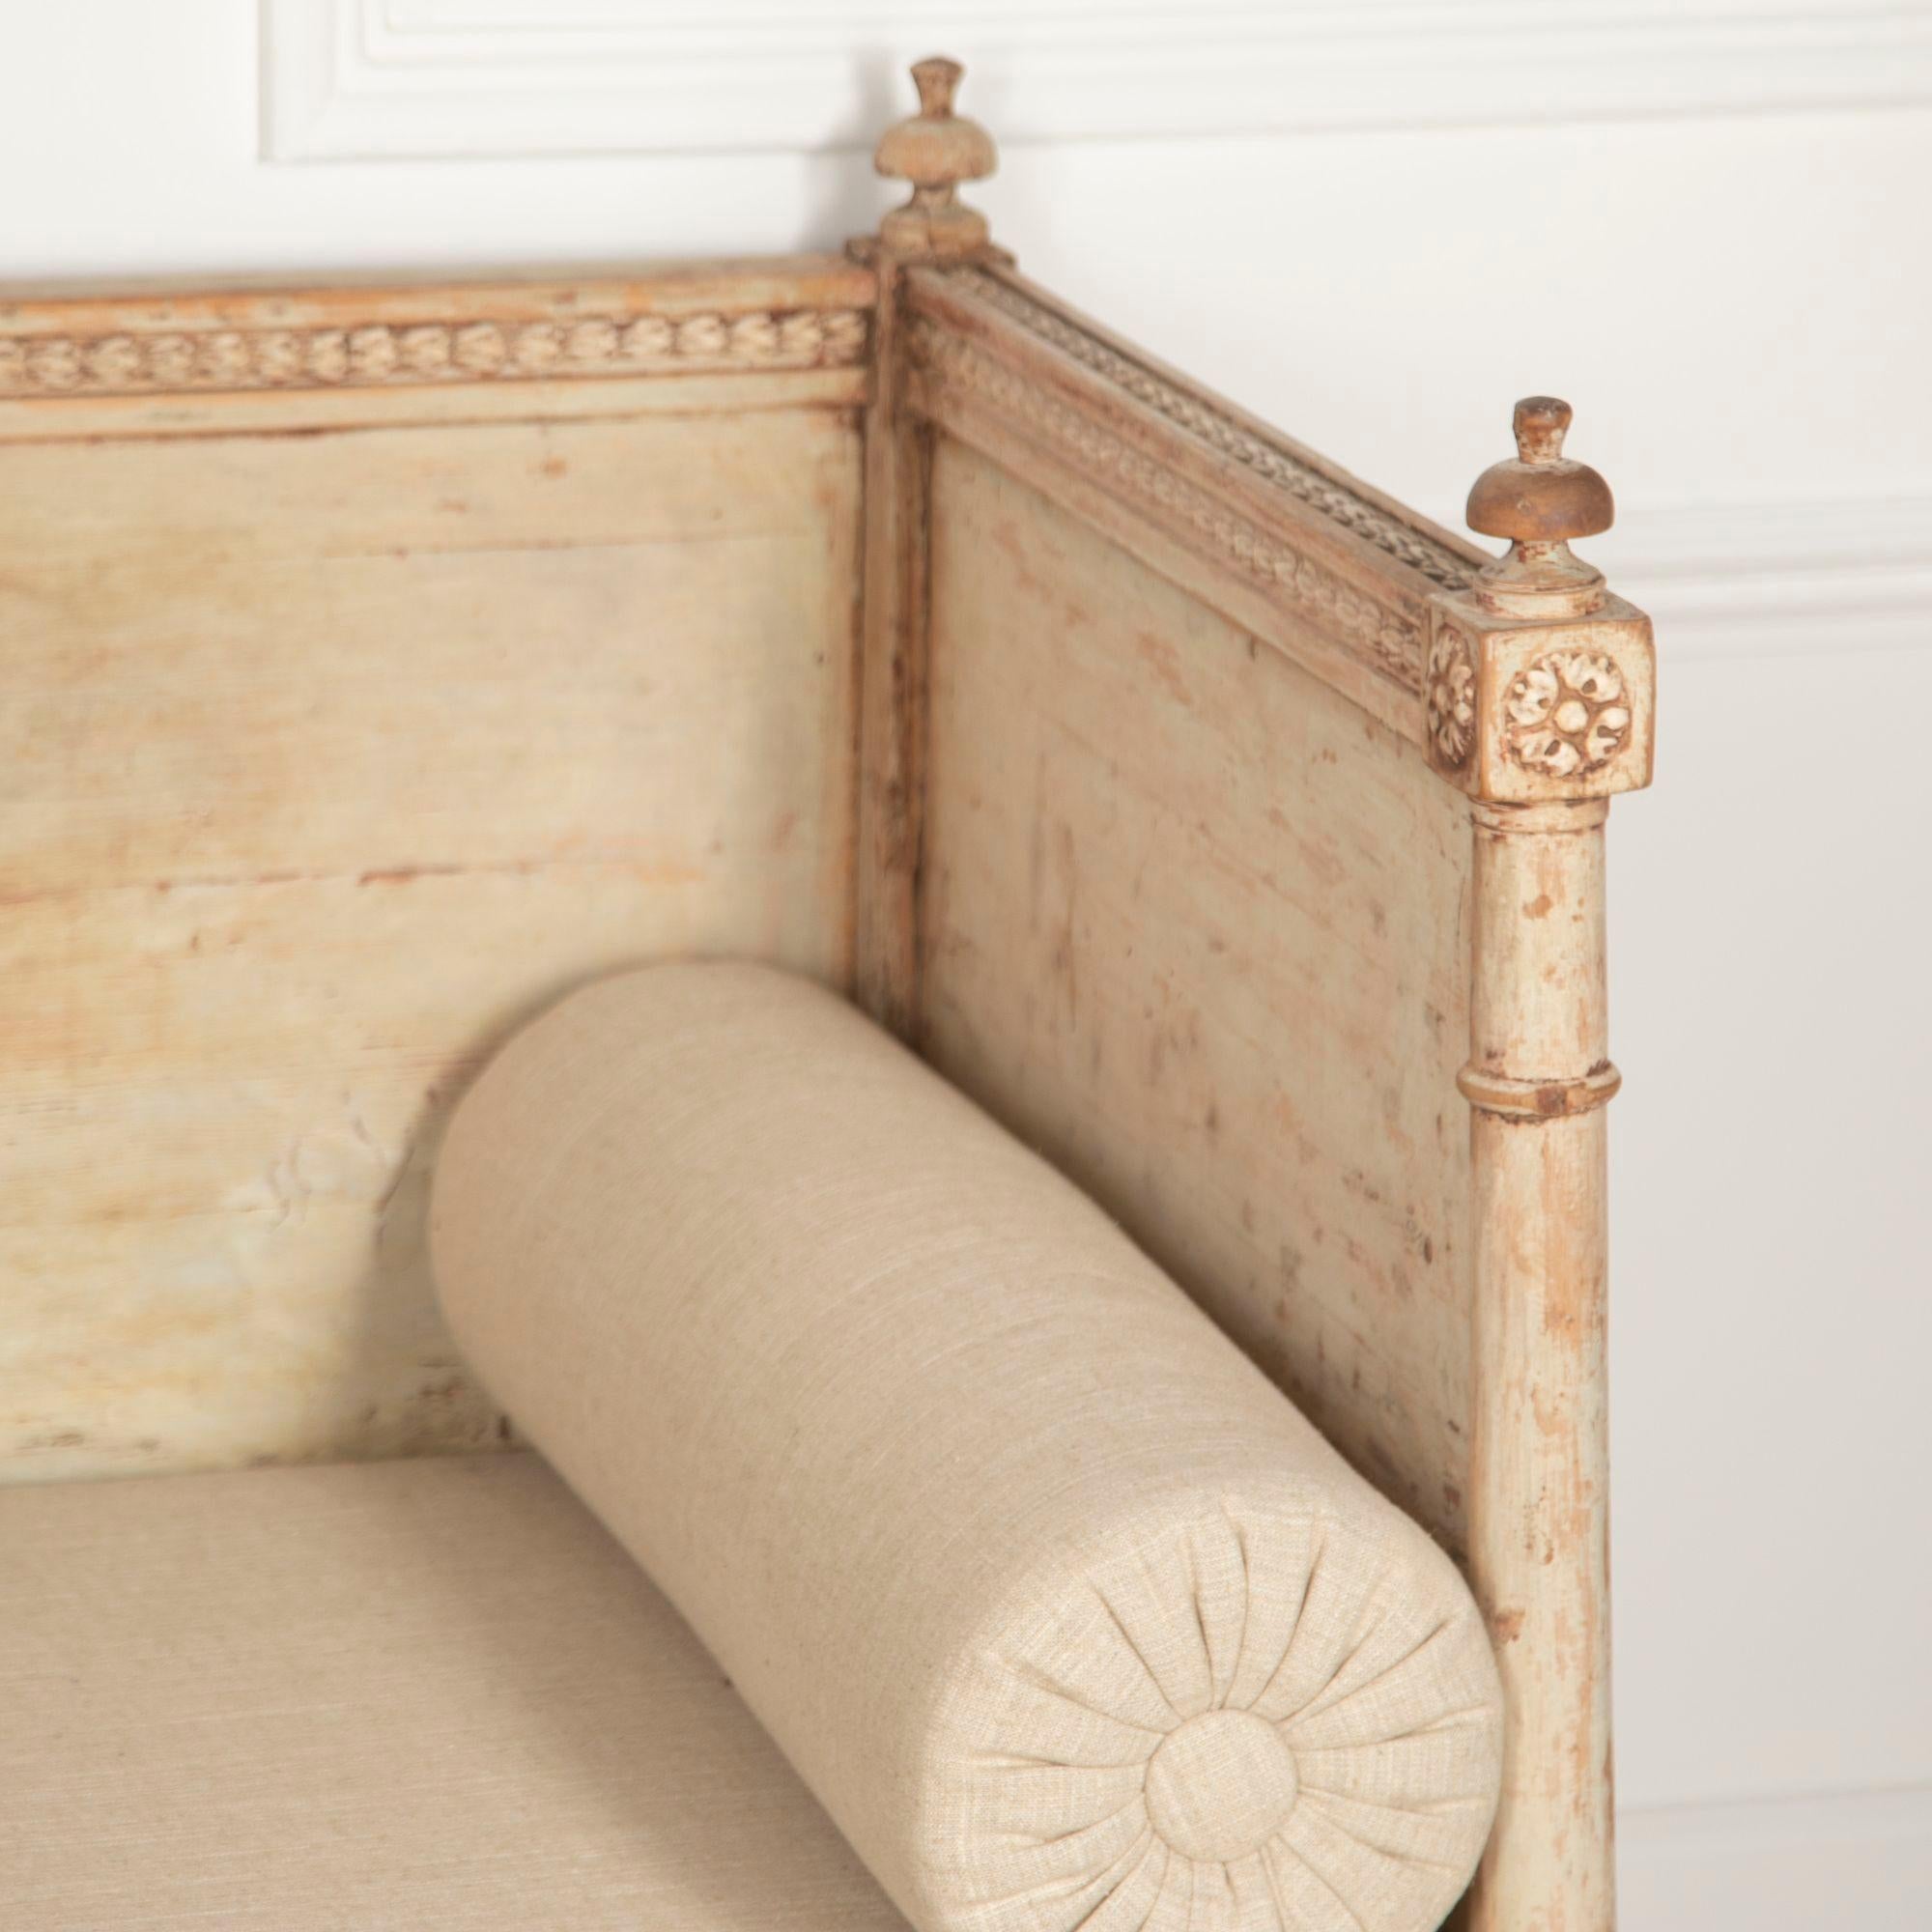 A 19th Century Swedish bench from the Empire period, the back panel decorated with a classical scene of a pair of griffon.
New seat cushion in plain linen.